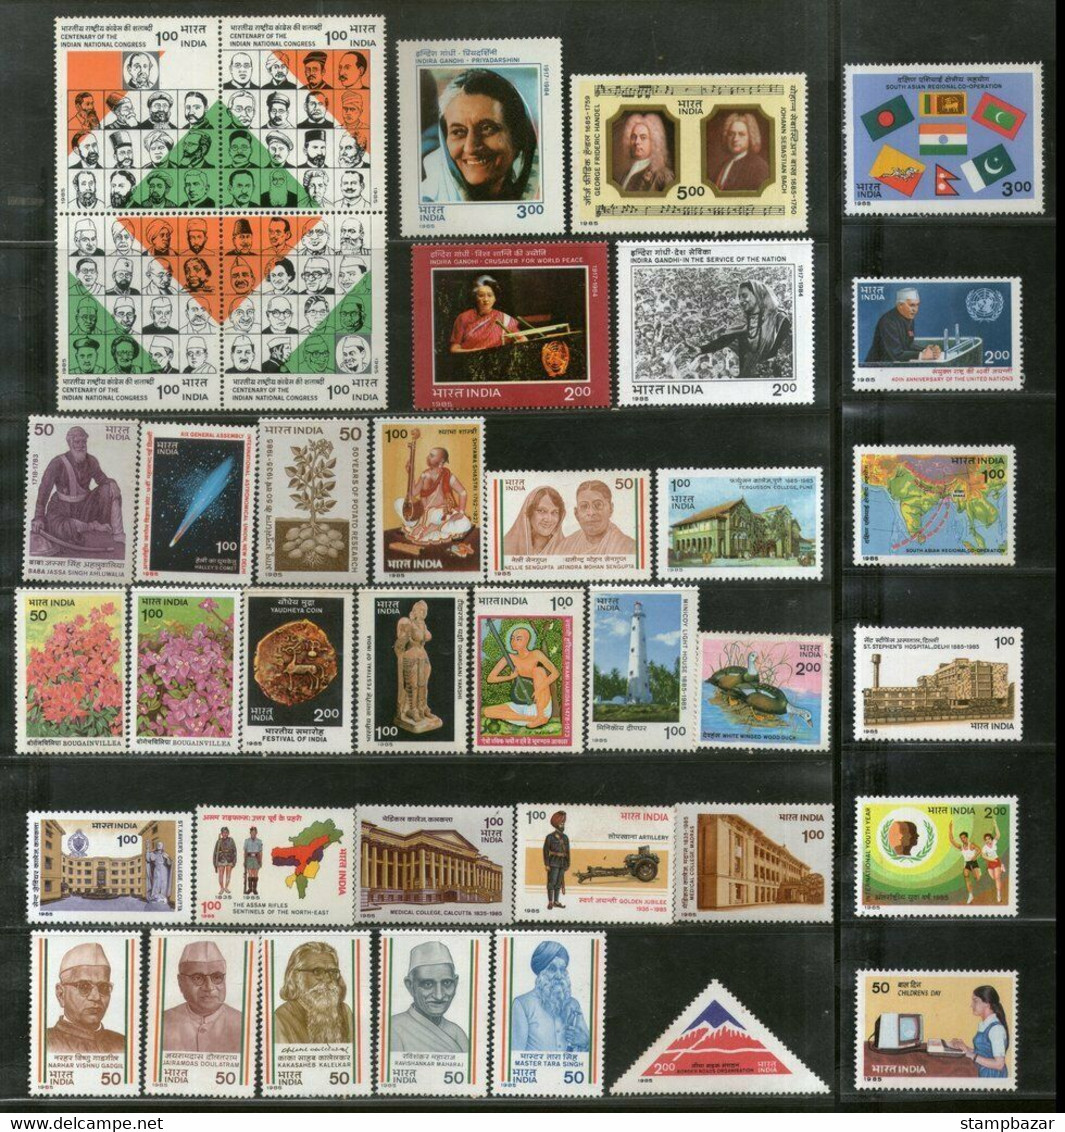 India 1985 Inde Indien Year Pack Full Complete Set Of 38 Stamps Assorted Themes MNH - Volledig Jaar